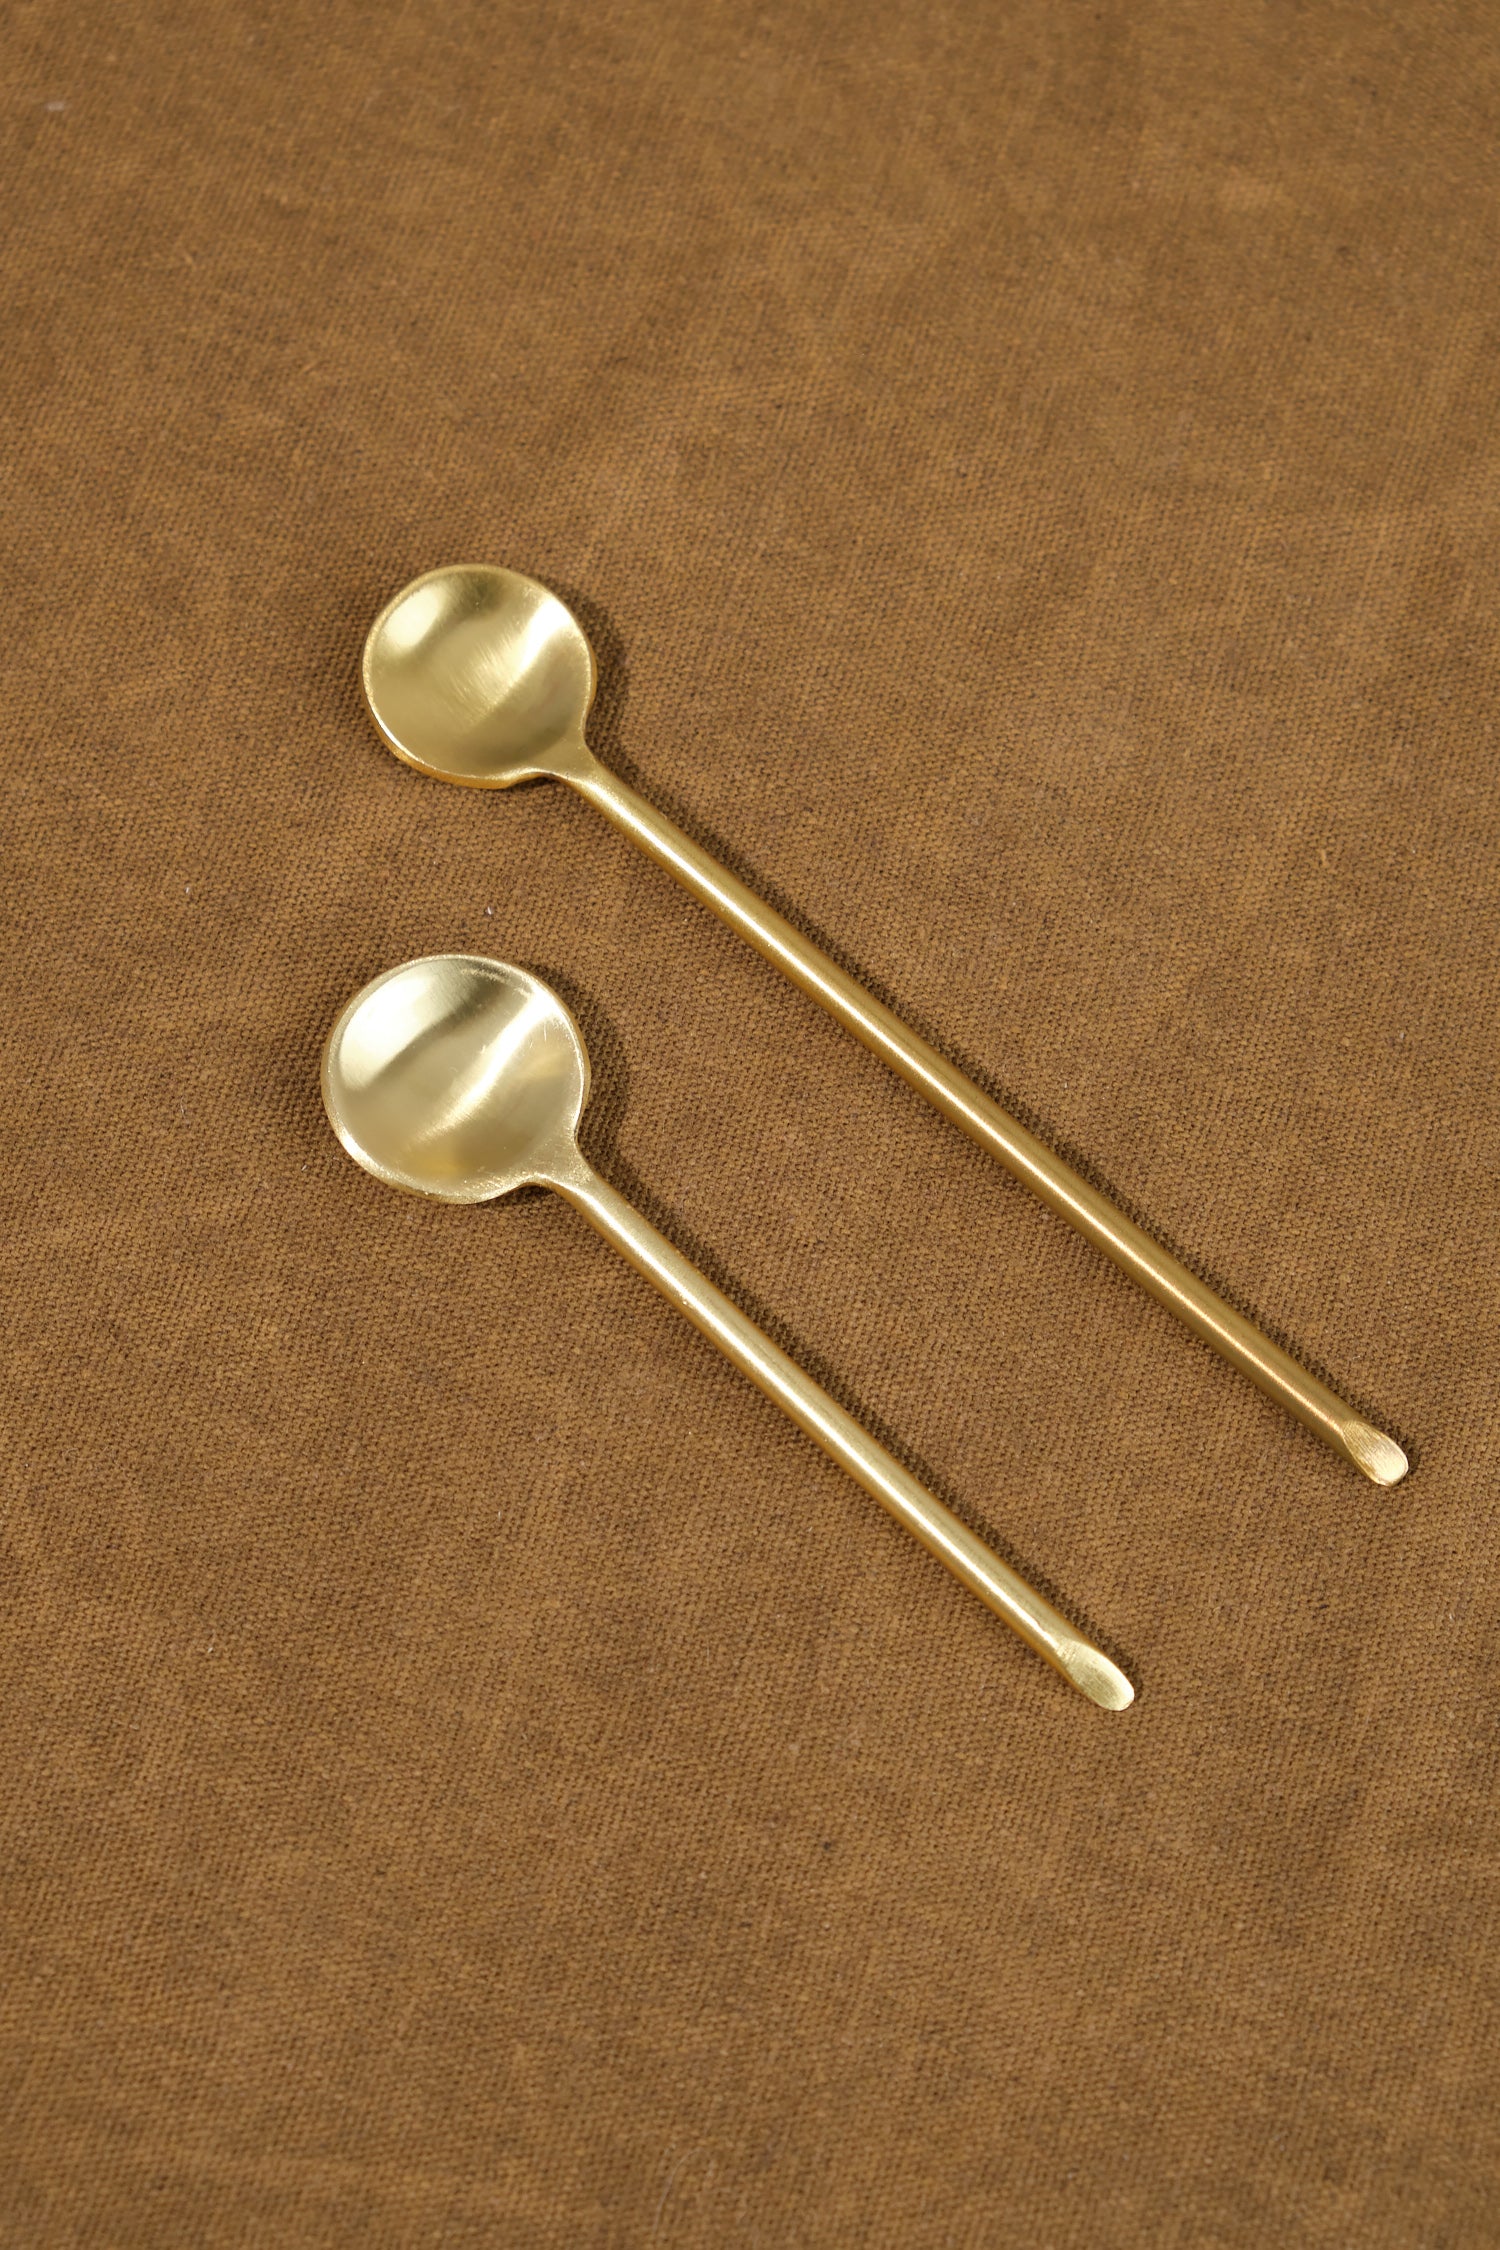 Gold Mini Spoon with gold thin spoon